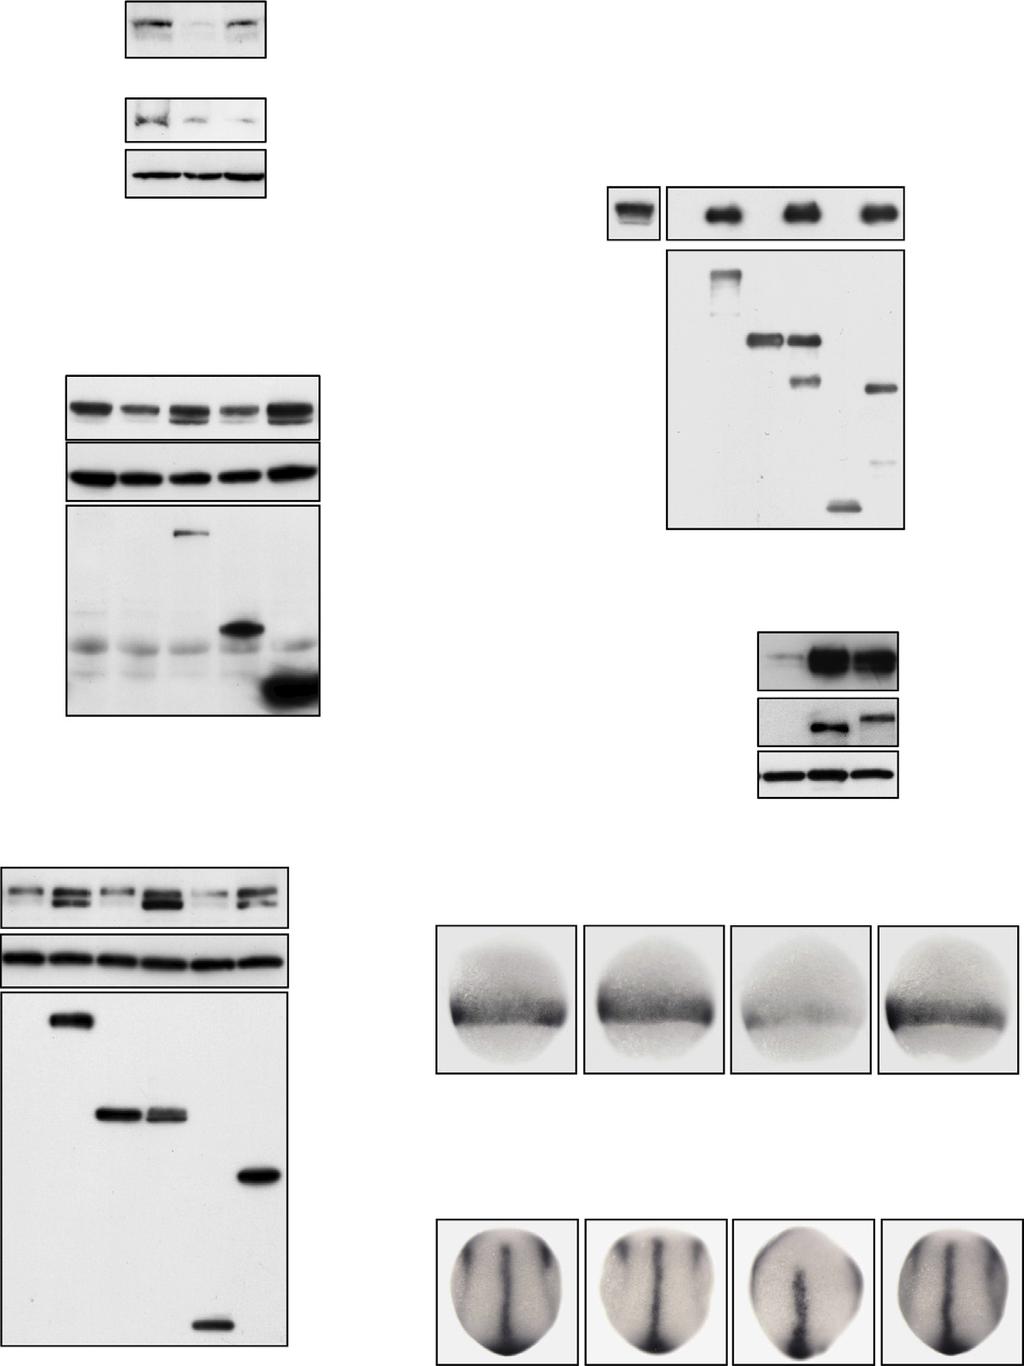 A D Figure 2. Hipk2 Regulates Dvl Stability in a Kinase Activity-Independent Manner in Mammalian Cells and Zebrafish (A) Hipk2 is required for endogenous Dvl stability in HeLa cells.